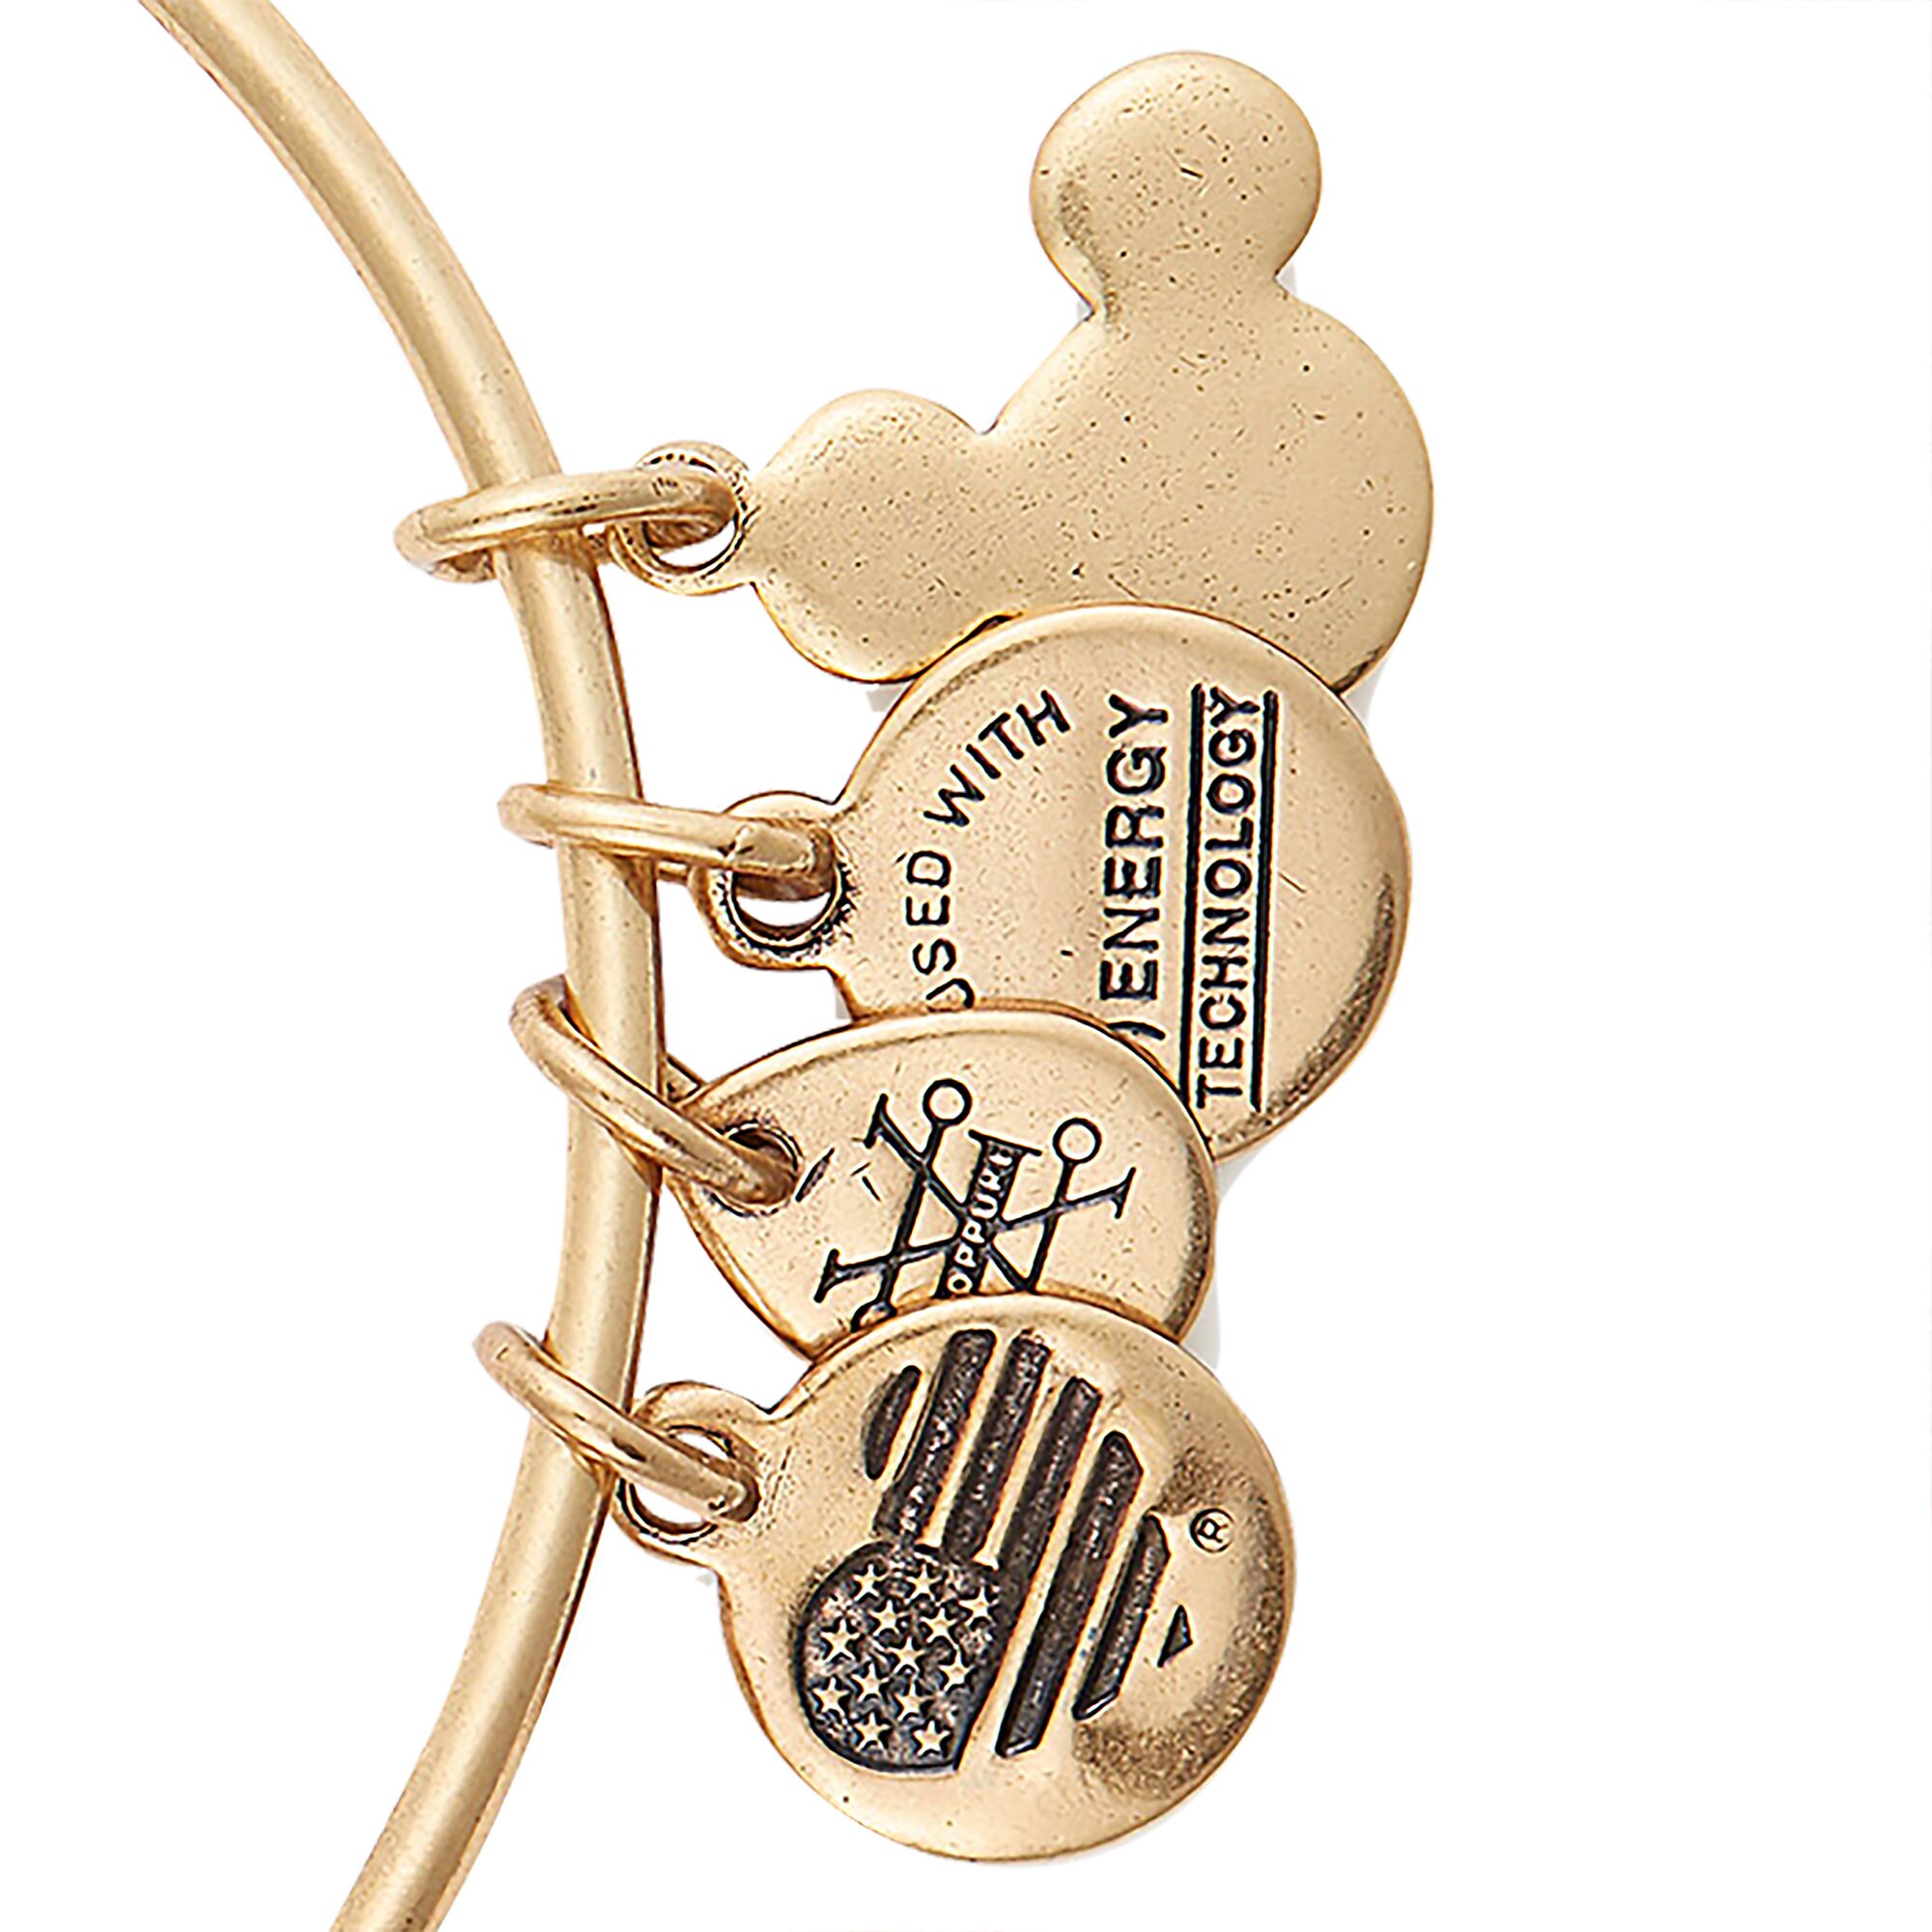 Sleeping Beauty Castle Figural Bangle by Alex and Ani